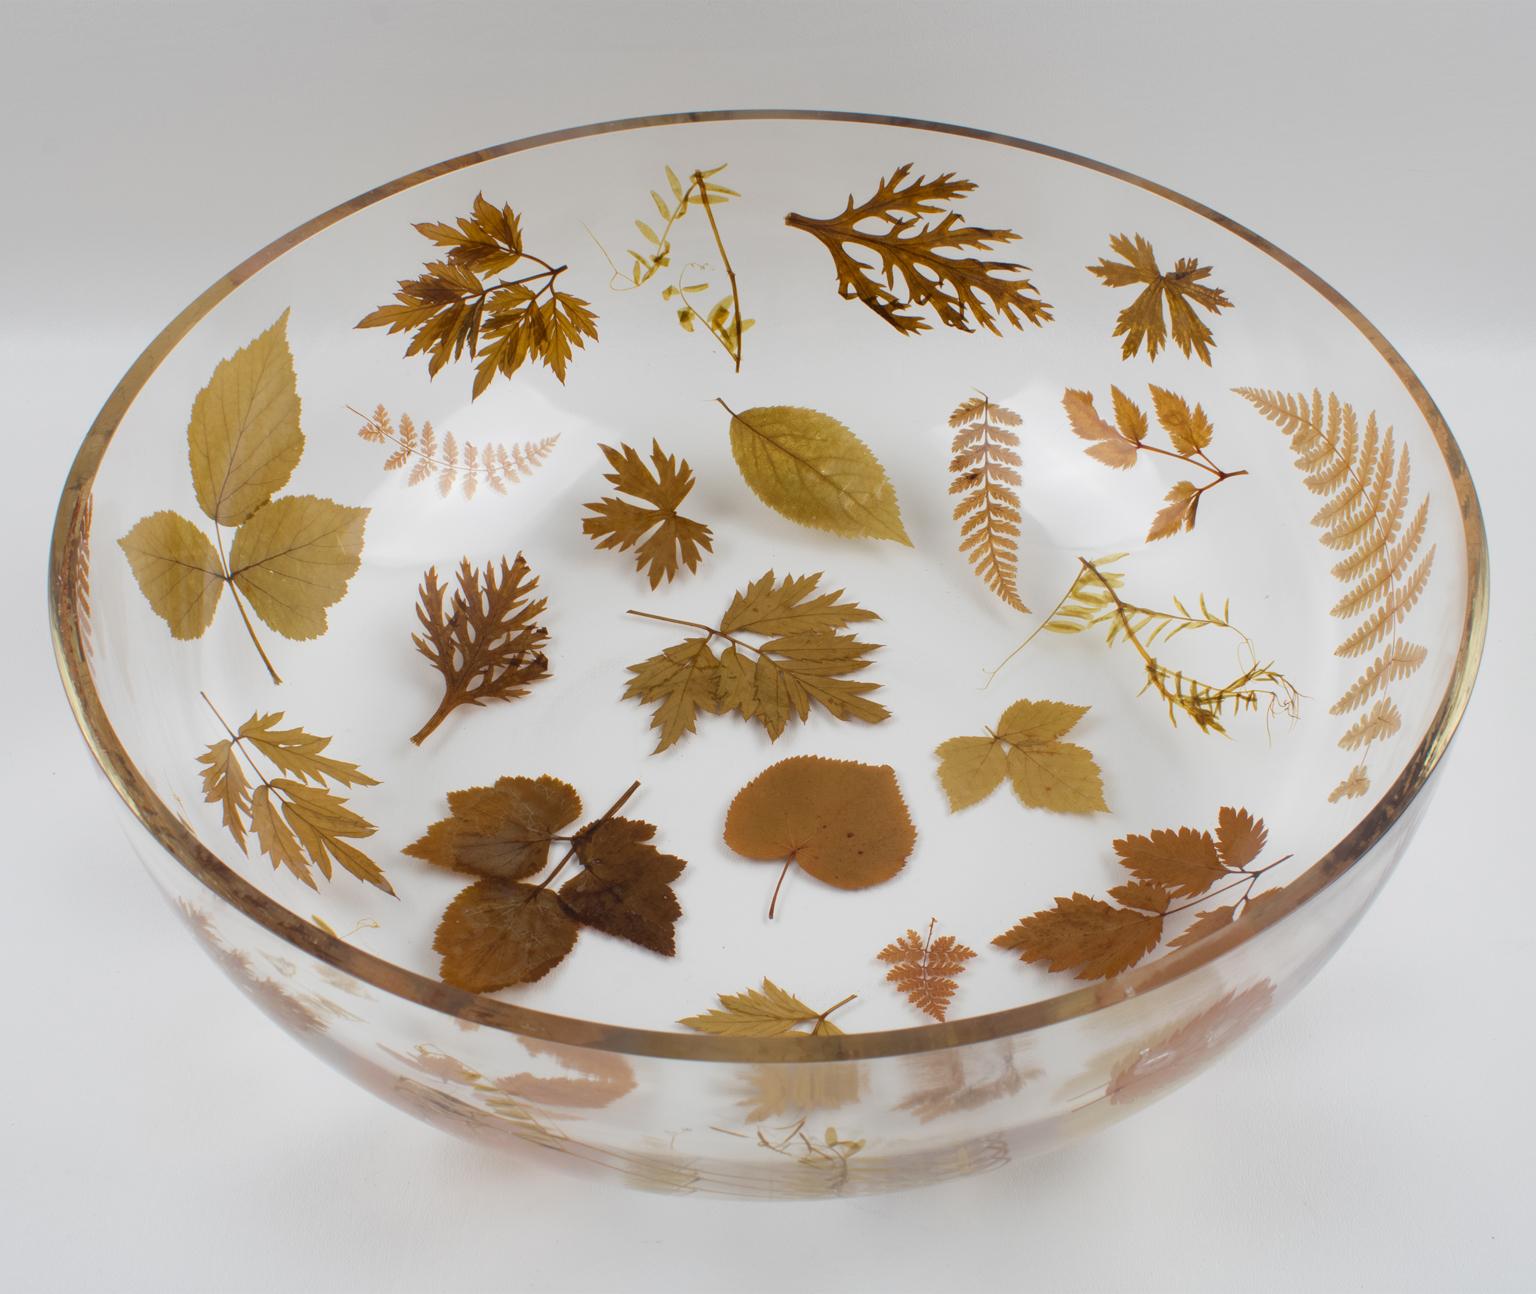 Very elegant 1970s resin decorative bowl, centerpiece, or serving dish by Resinplast, Italy. Extra thick clear resin or acrylic deep rounded oversized bowl shape with assorted real autumn leaves and dried flowers embedded in the material. The